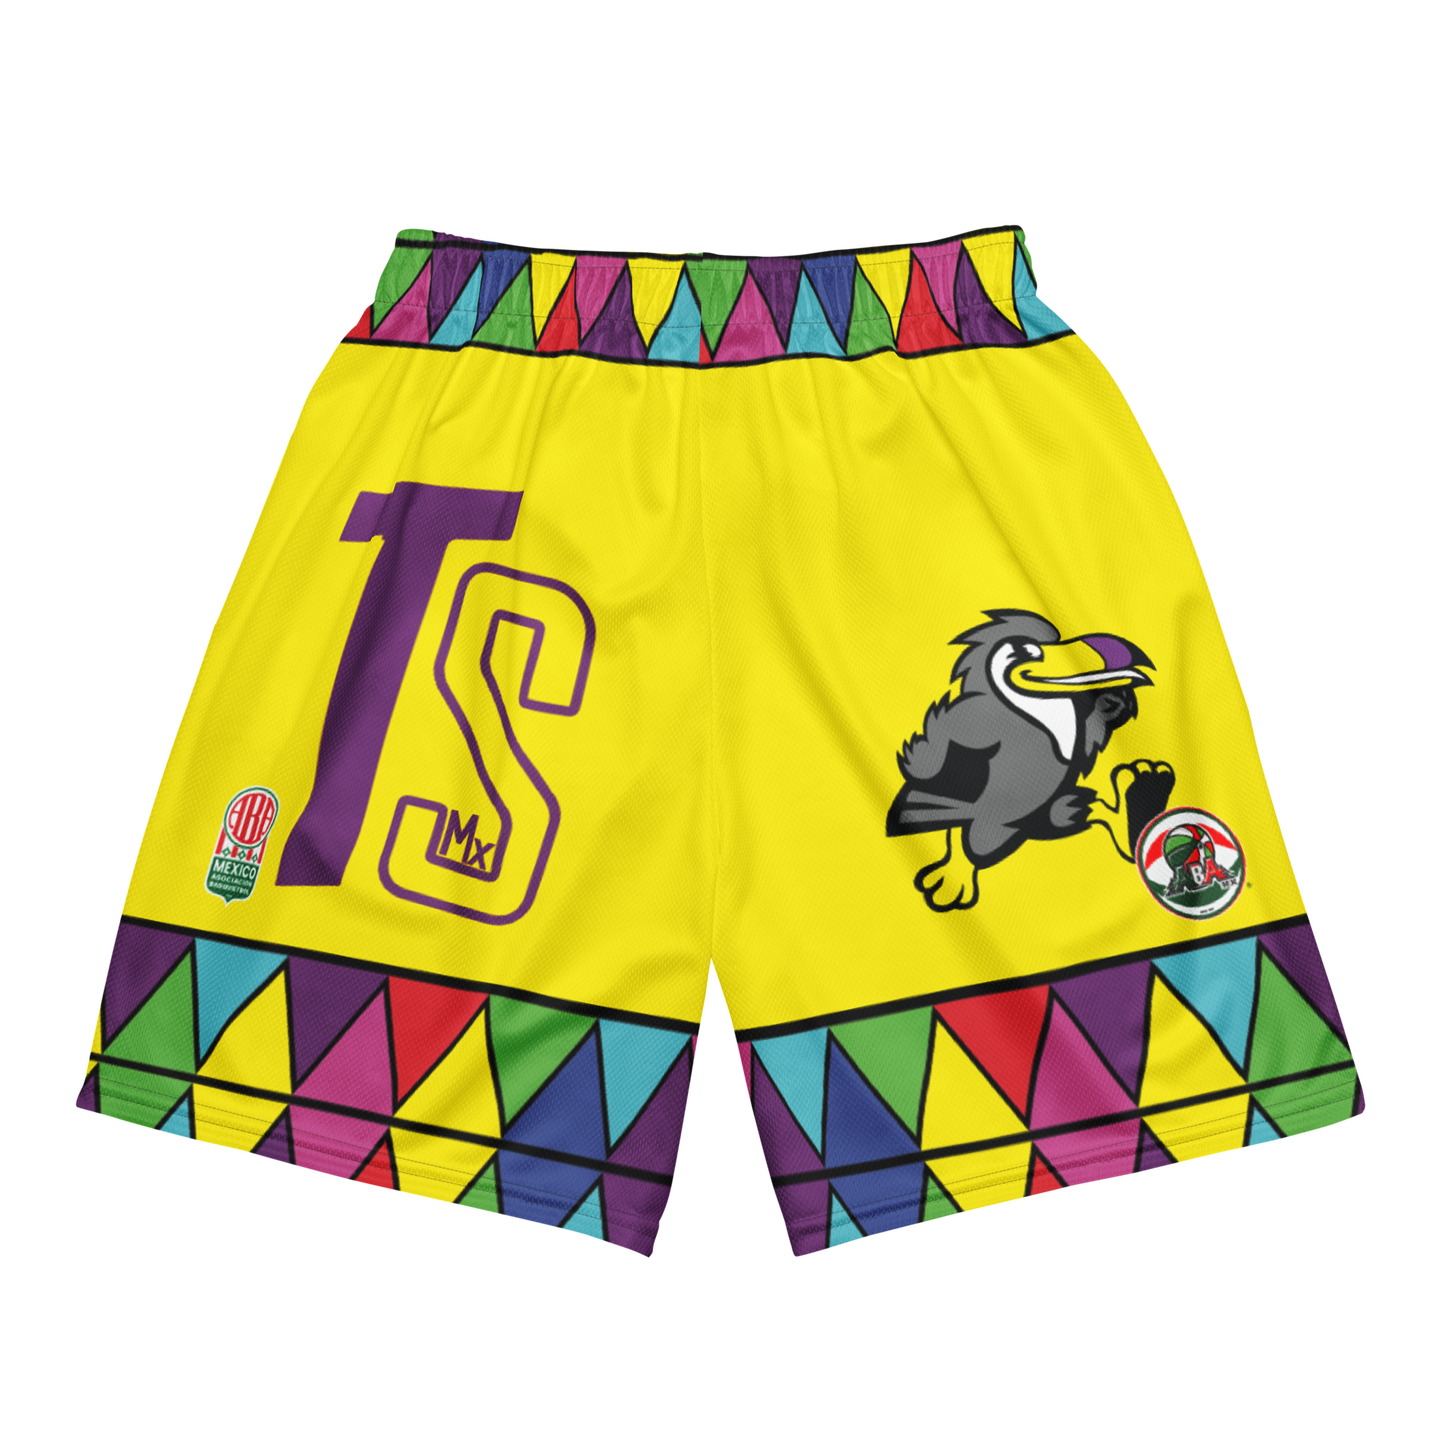 the Classic Team Yellow Shorts – Trevor Conner #36 Edition! 🌟🏀